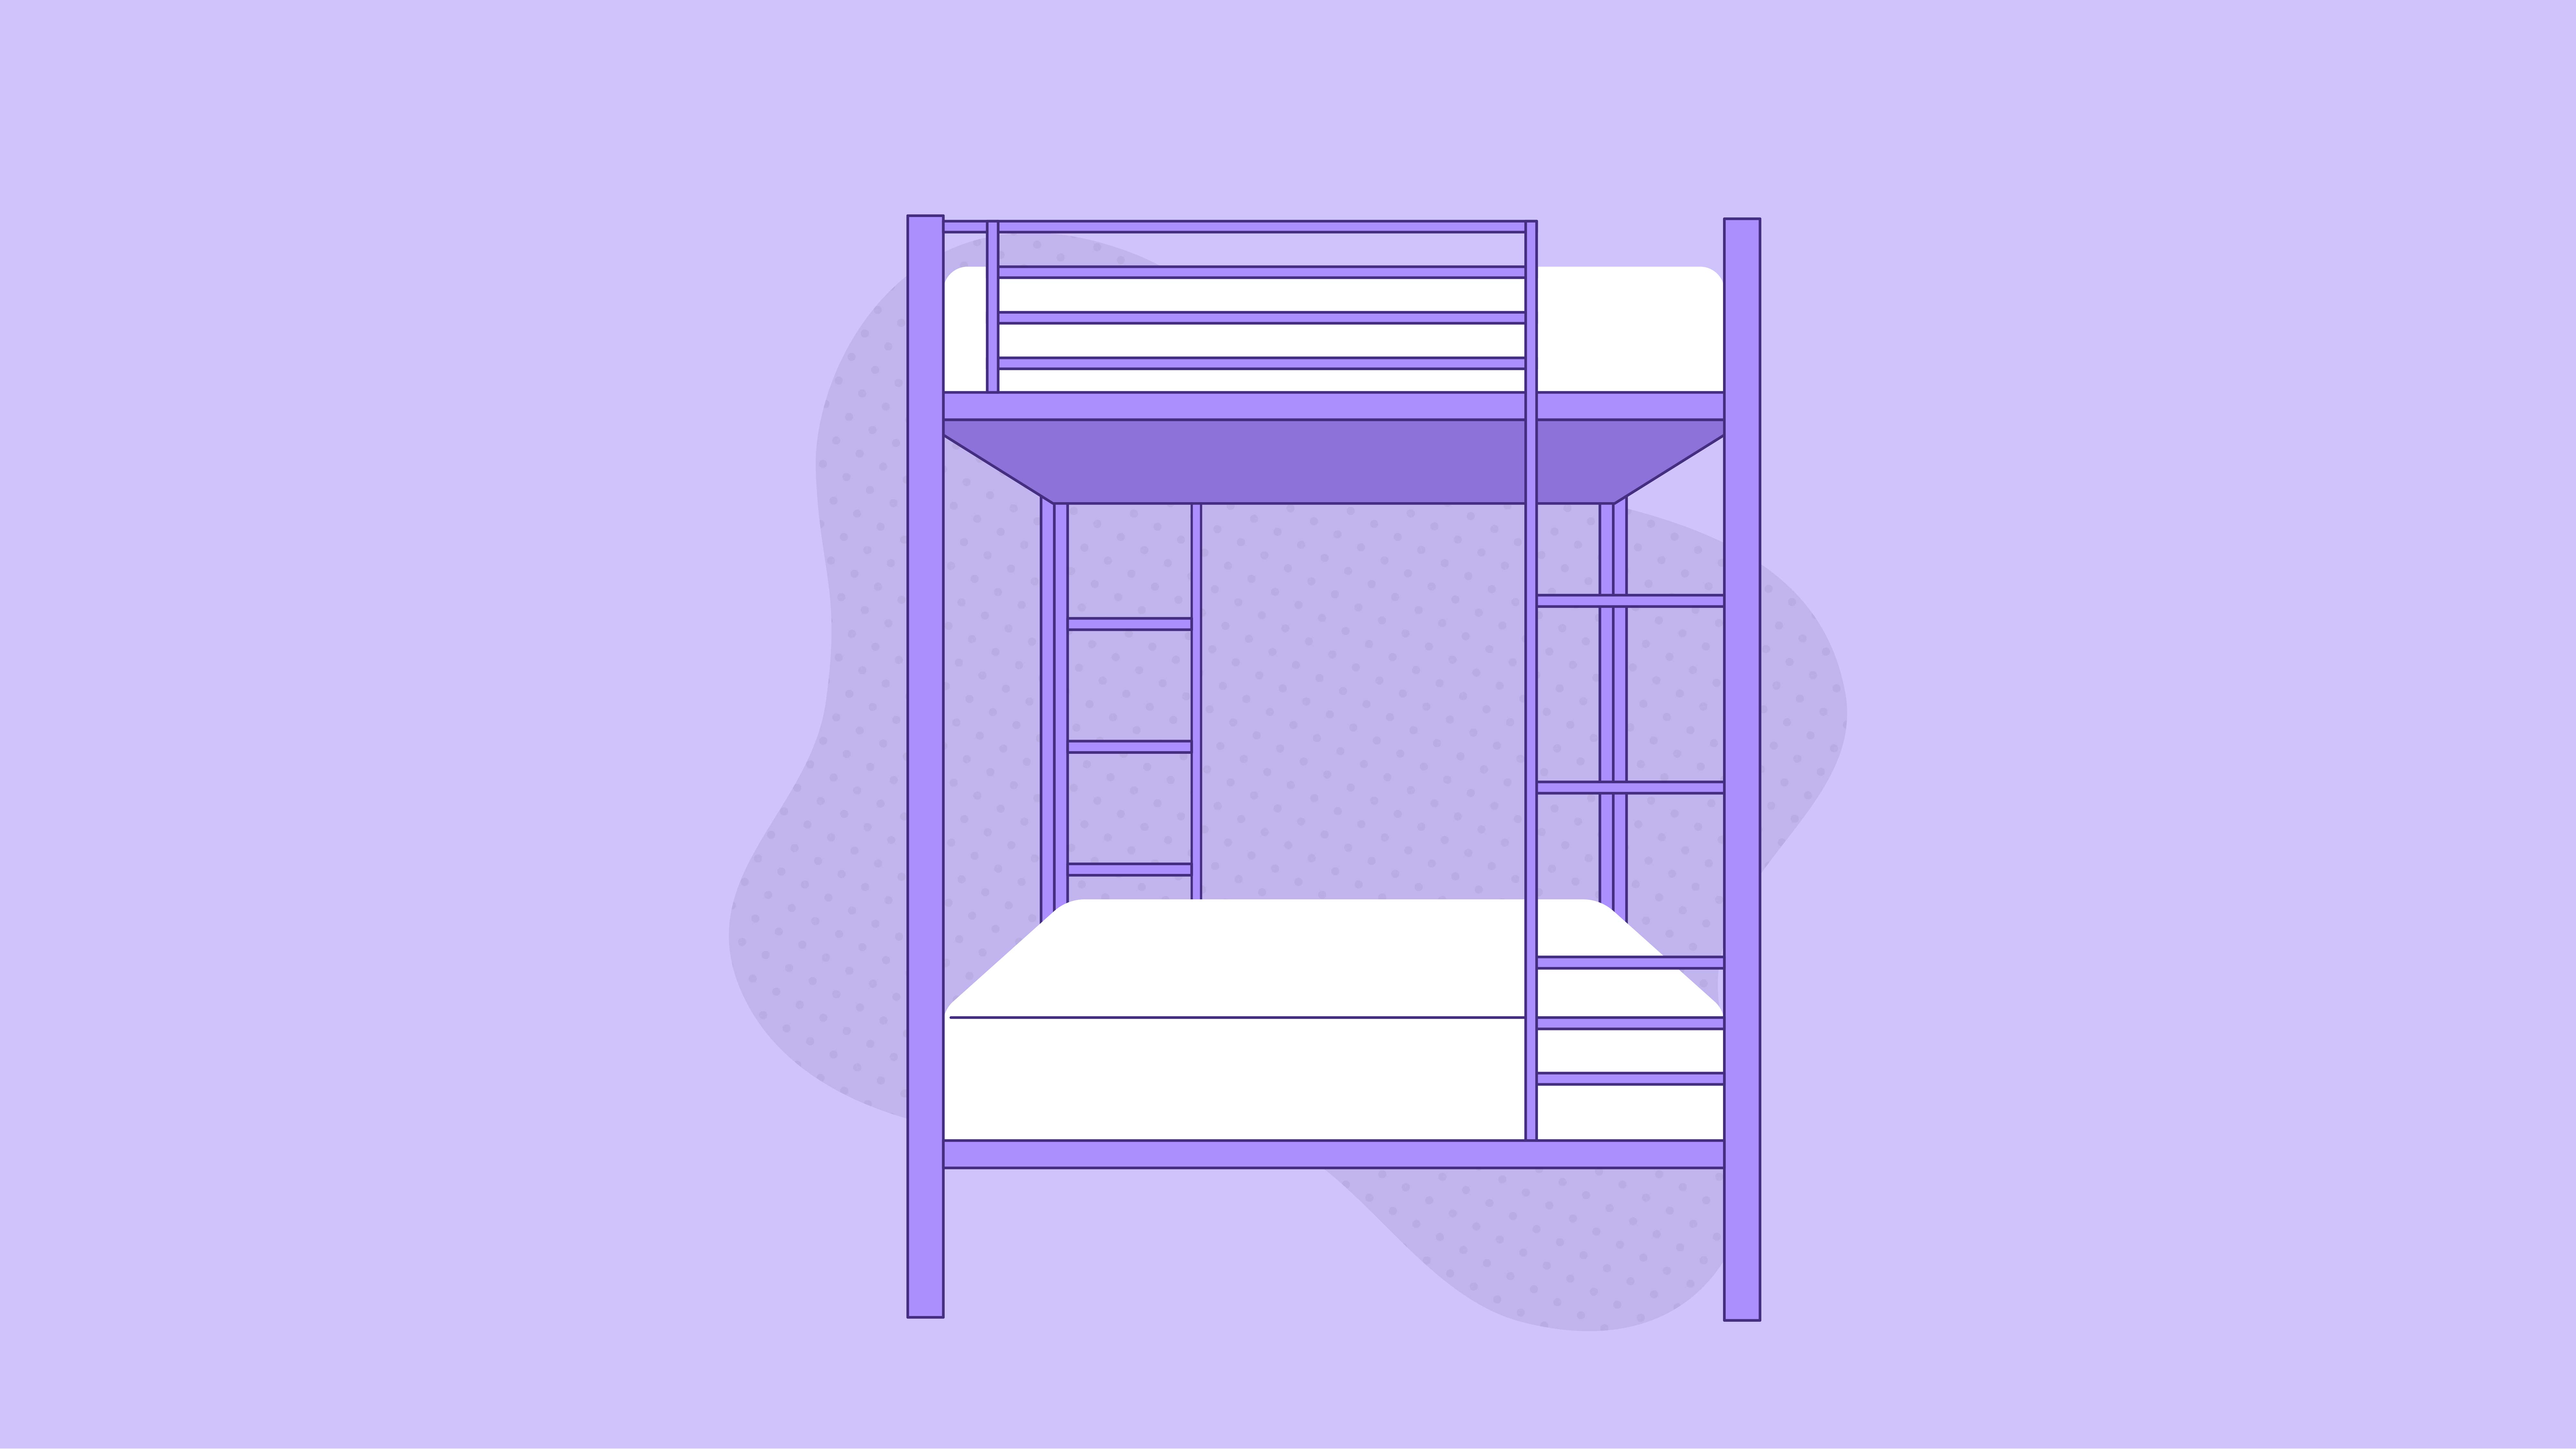 Bunk Bed Dimensions and Sizes Guide